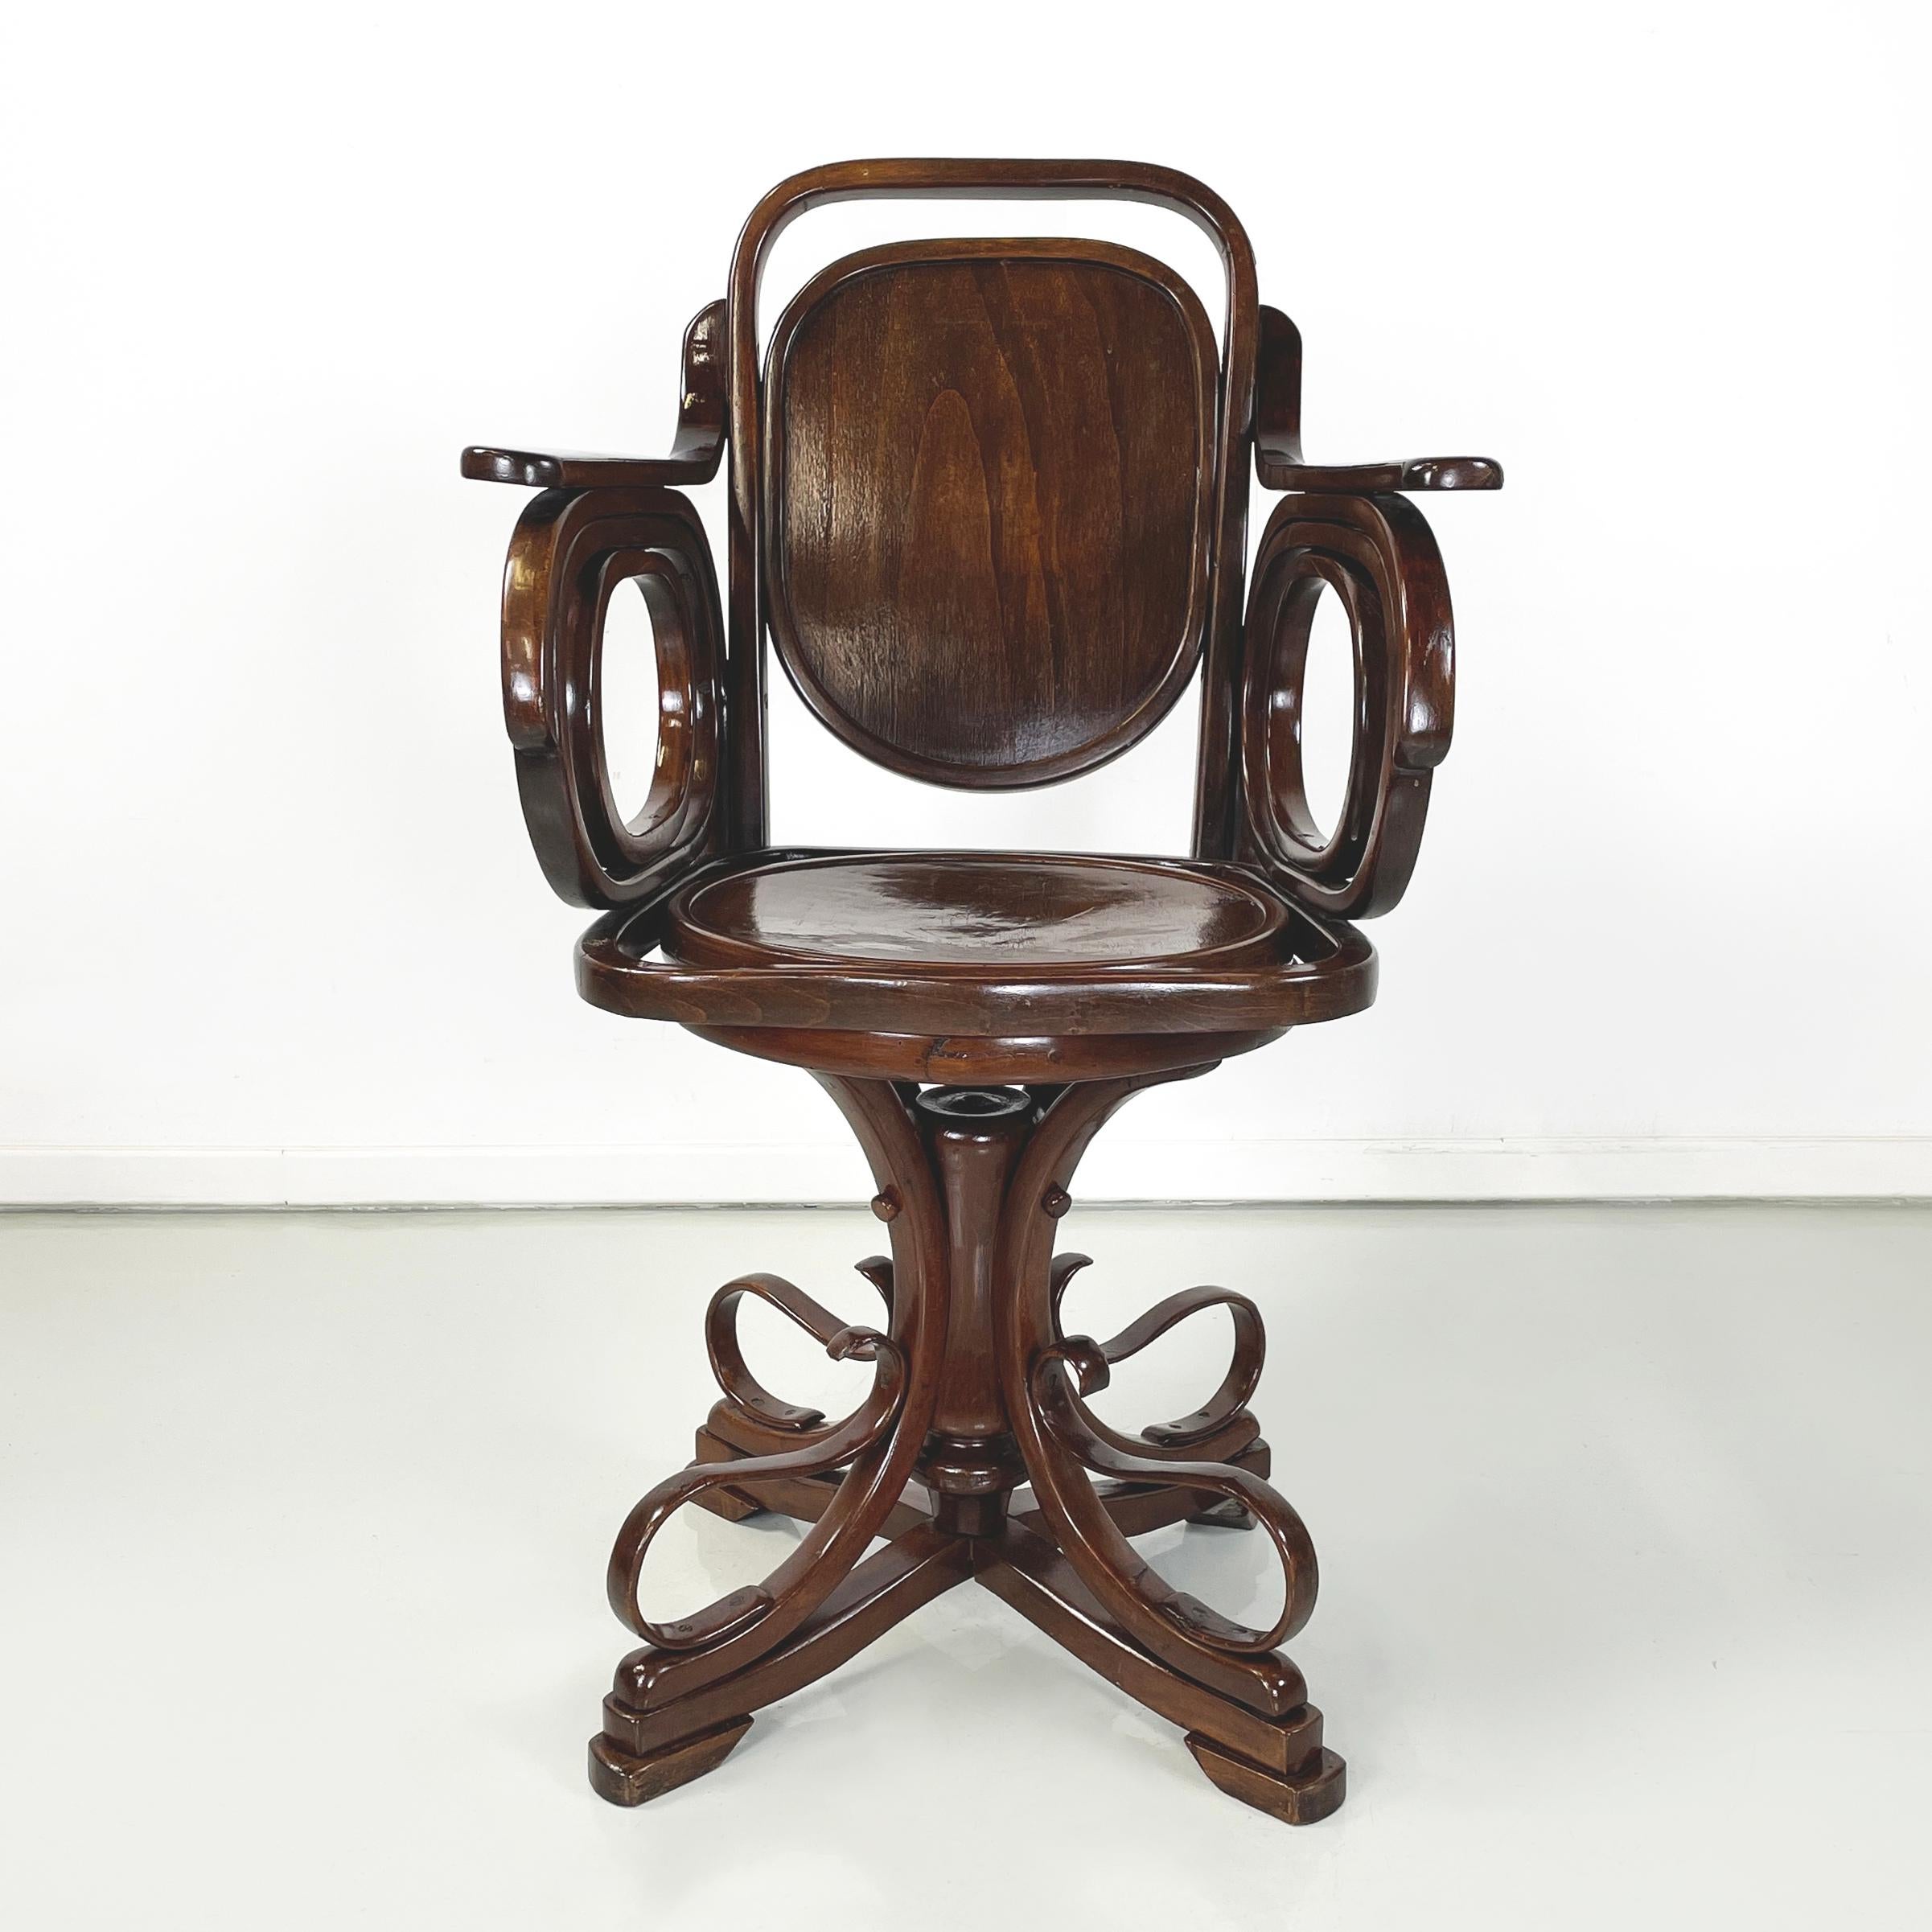 Austrian Art Nouveaux Swivel chair with armrests in solid wood by Thonet, early 1900s
Swivel chair entirely in solid wood. The backrest and seat are round in shape. On the back of the backrest and on the seat there are some floral design